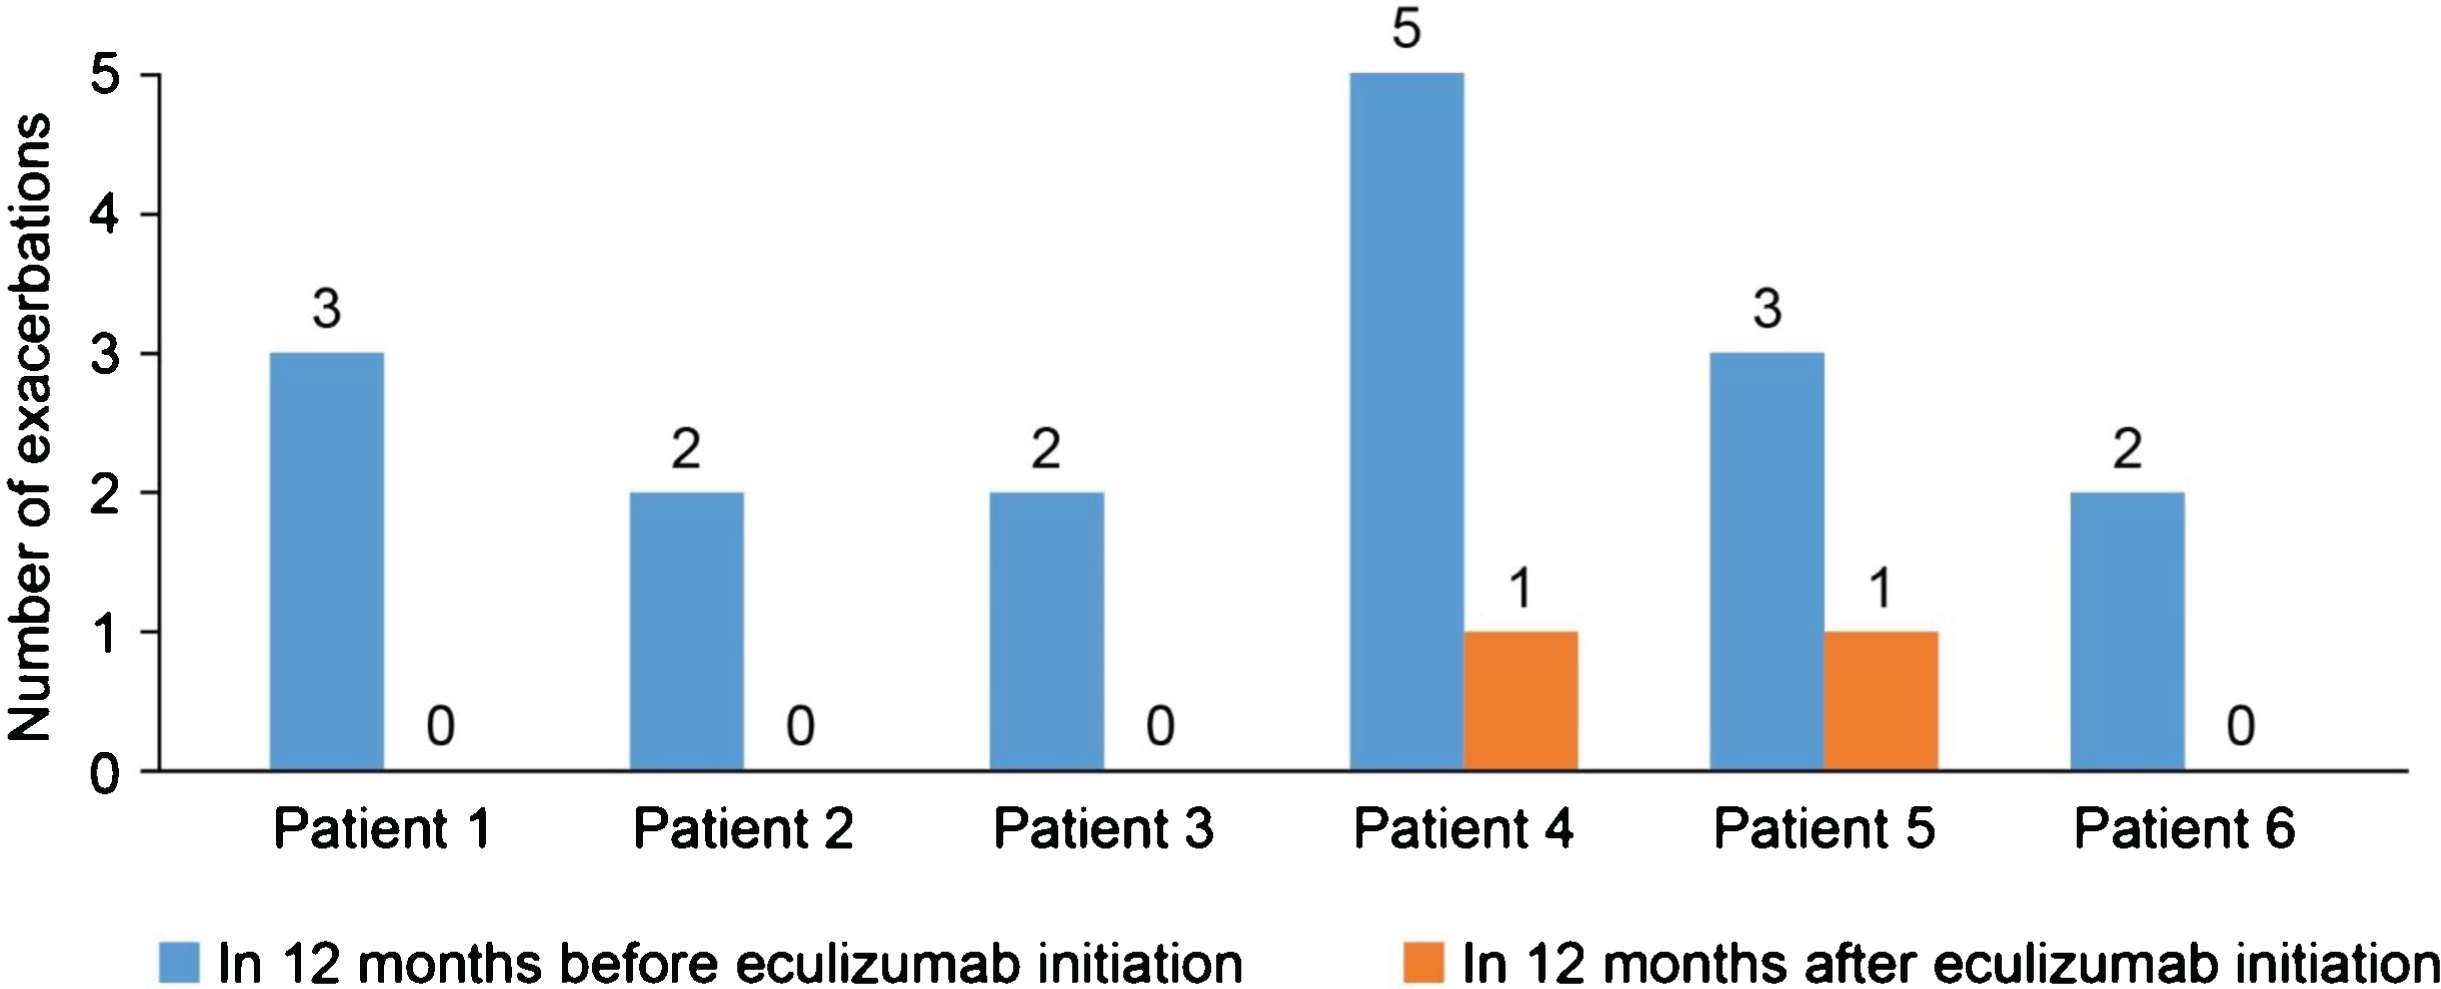 Number of exacerbations in the 12 months before and after starting eculizumab.